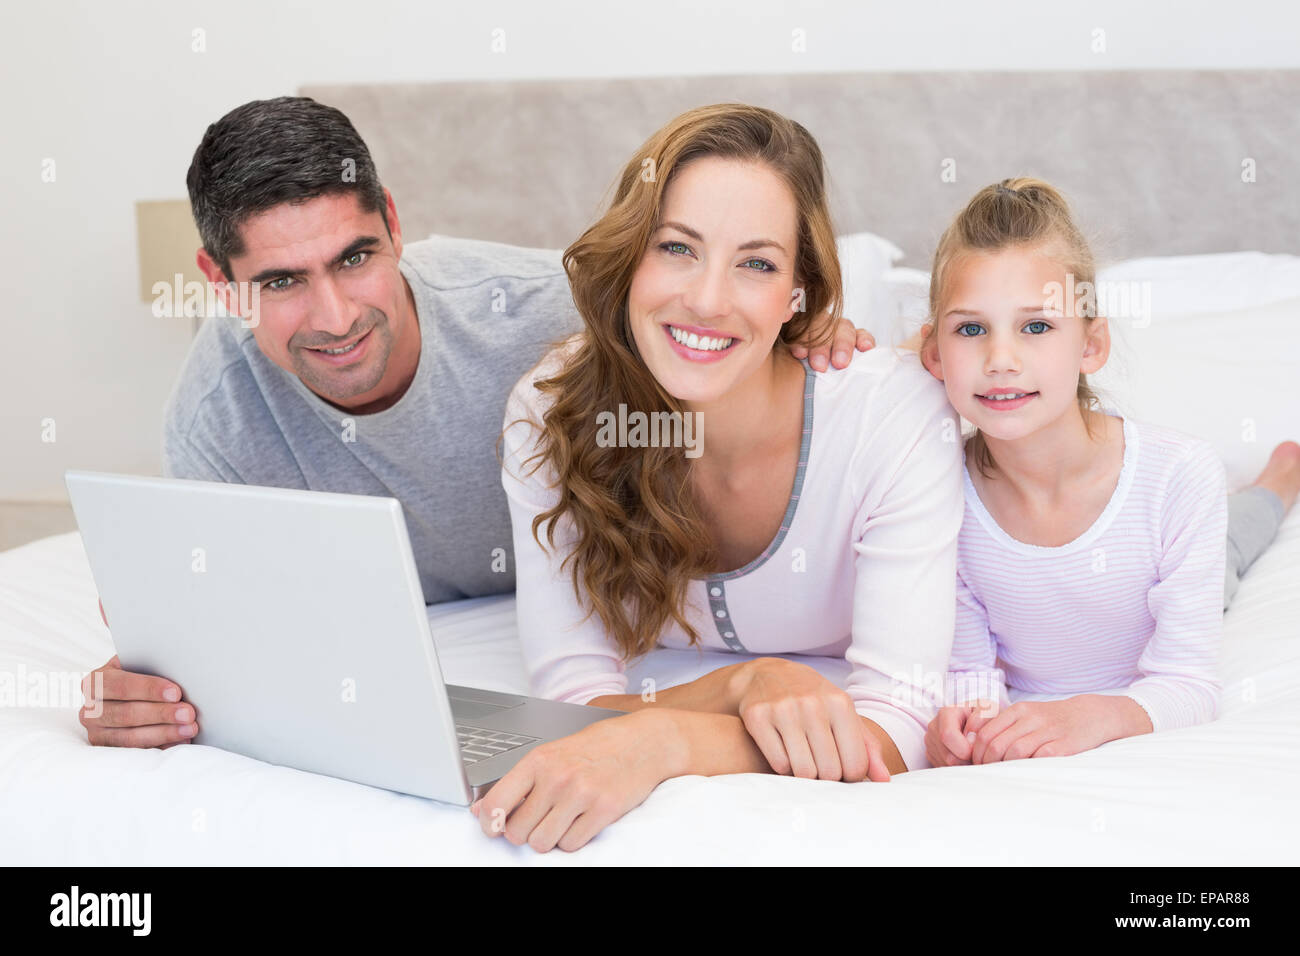 Family with laptop in bed Stock Photo